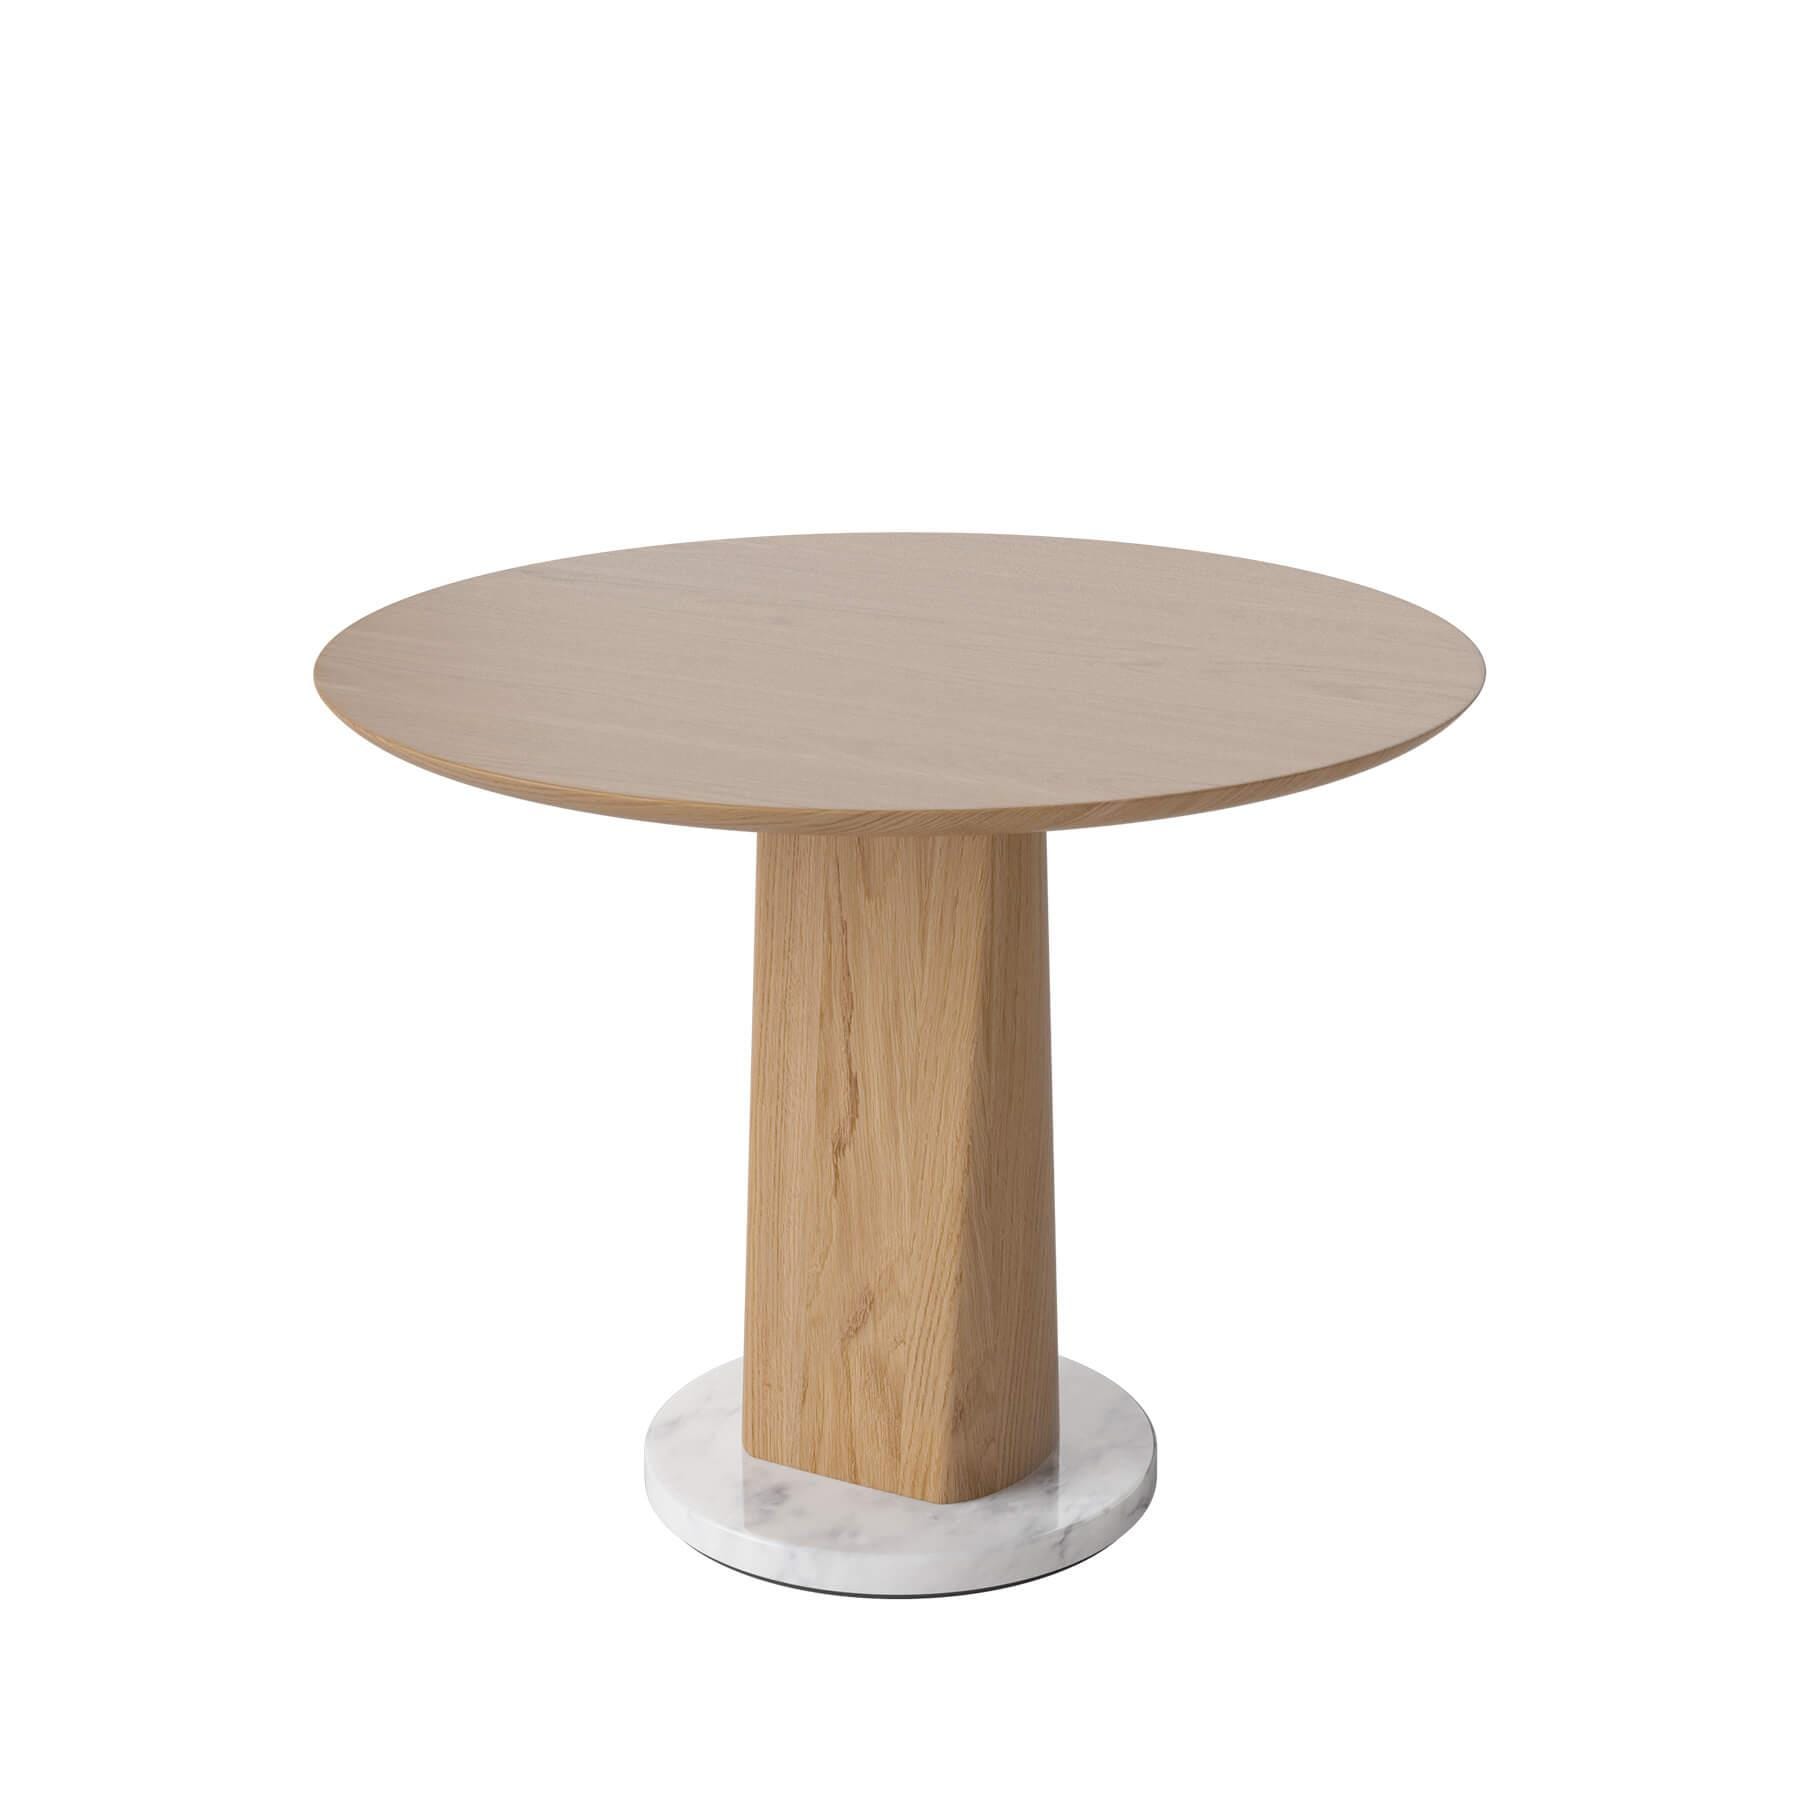 Bolia Root Side Table Large Low Oiled Oak Light Wood Designer Furniture From Holloways Of Ludlow